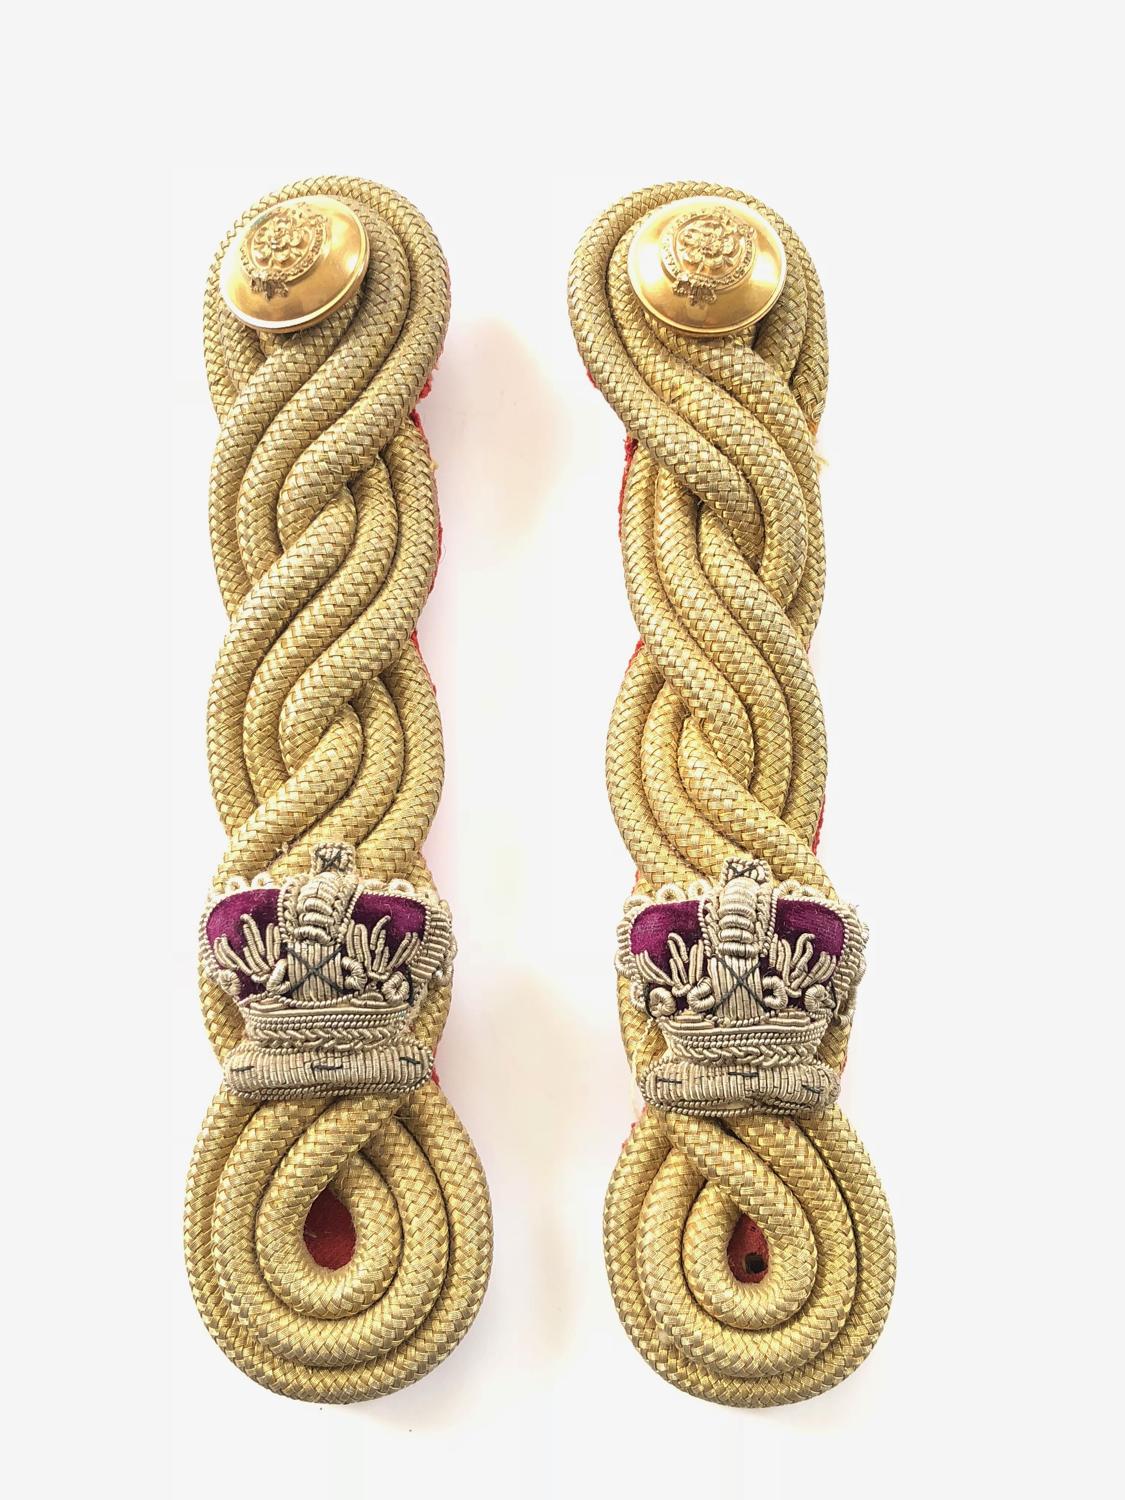 7th (Royal Fusiliers) Regiment of Foot Victorian Major’s epaulettes